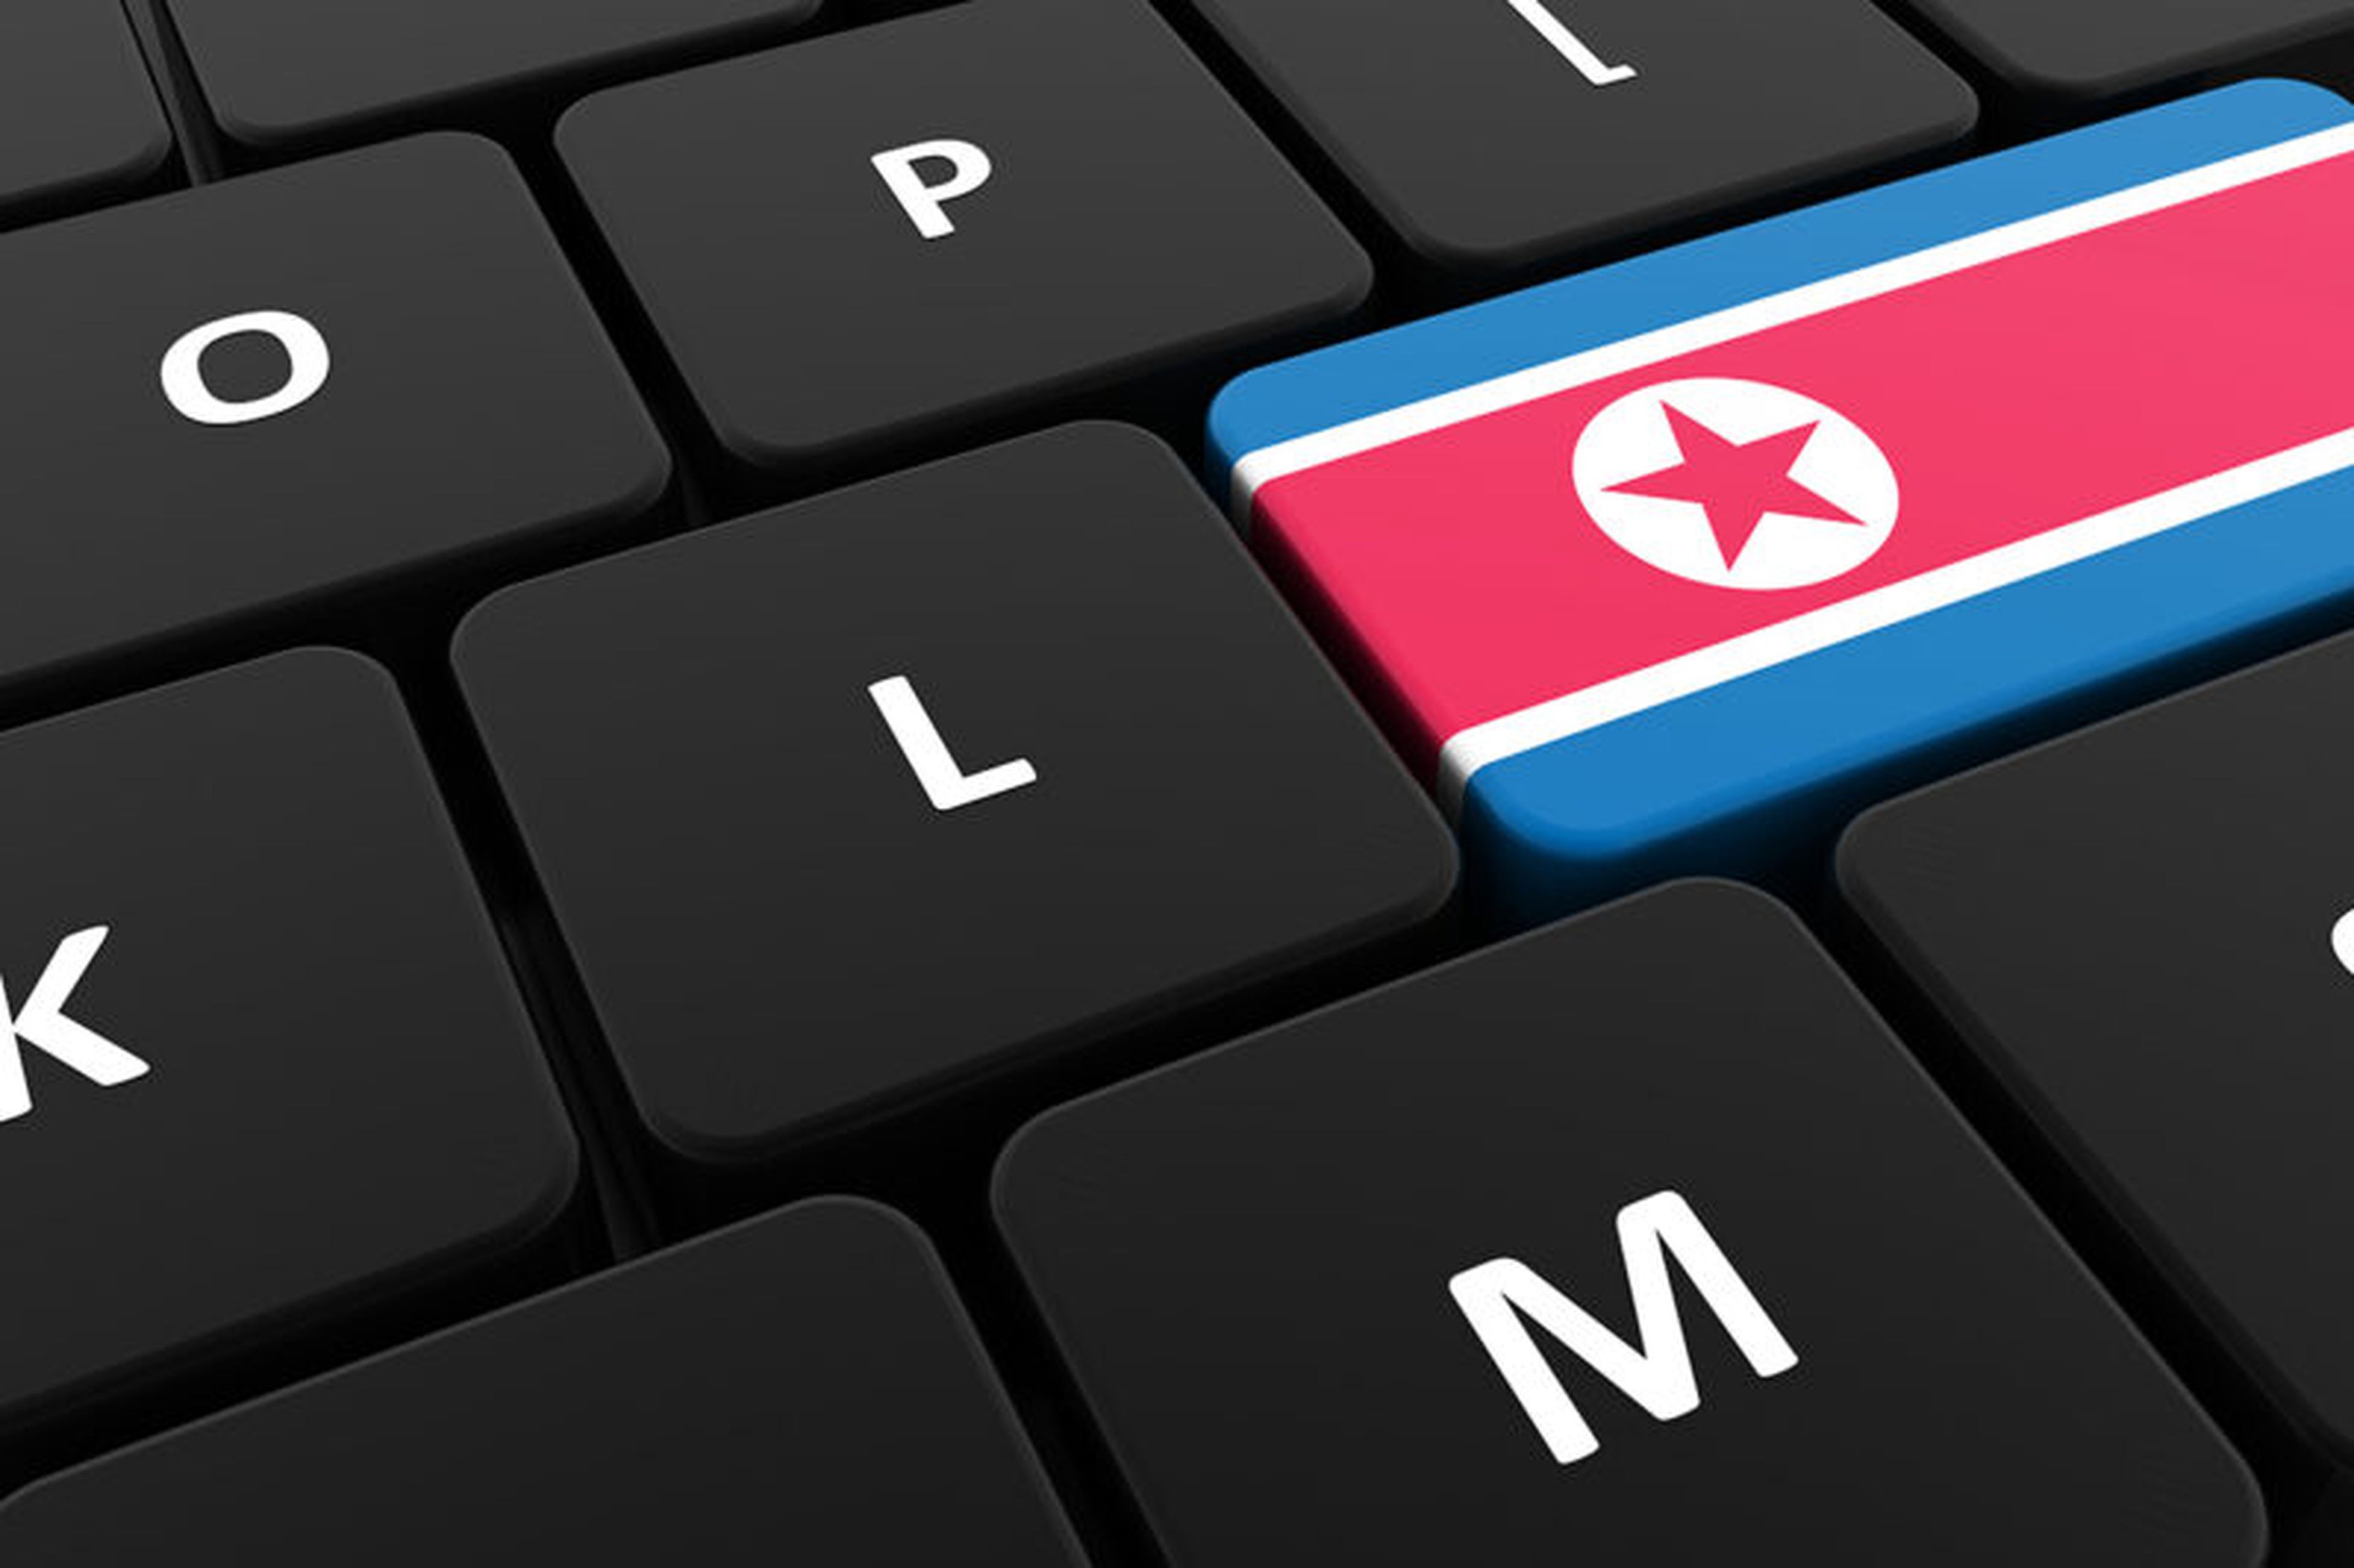 Computer keyboard, close-up button of the flag of North Korea.